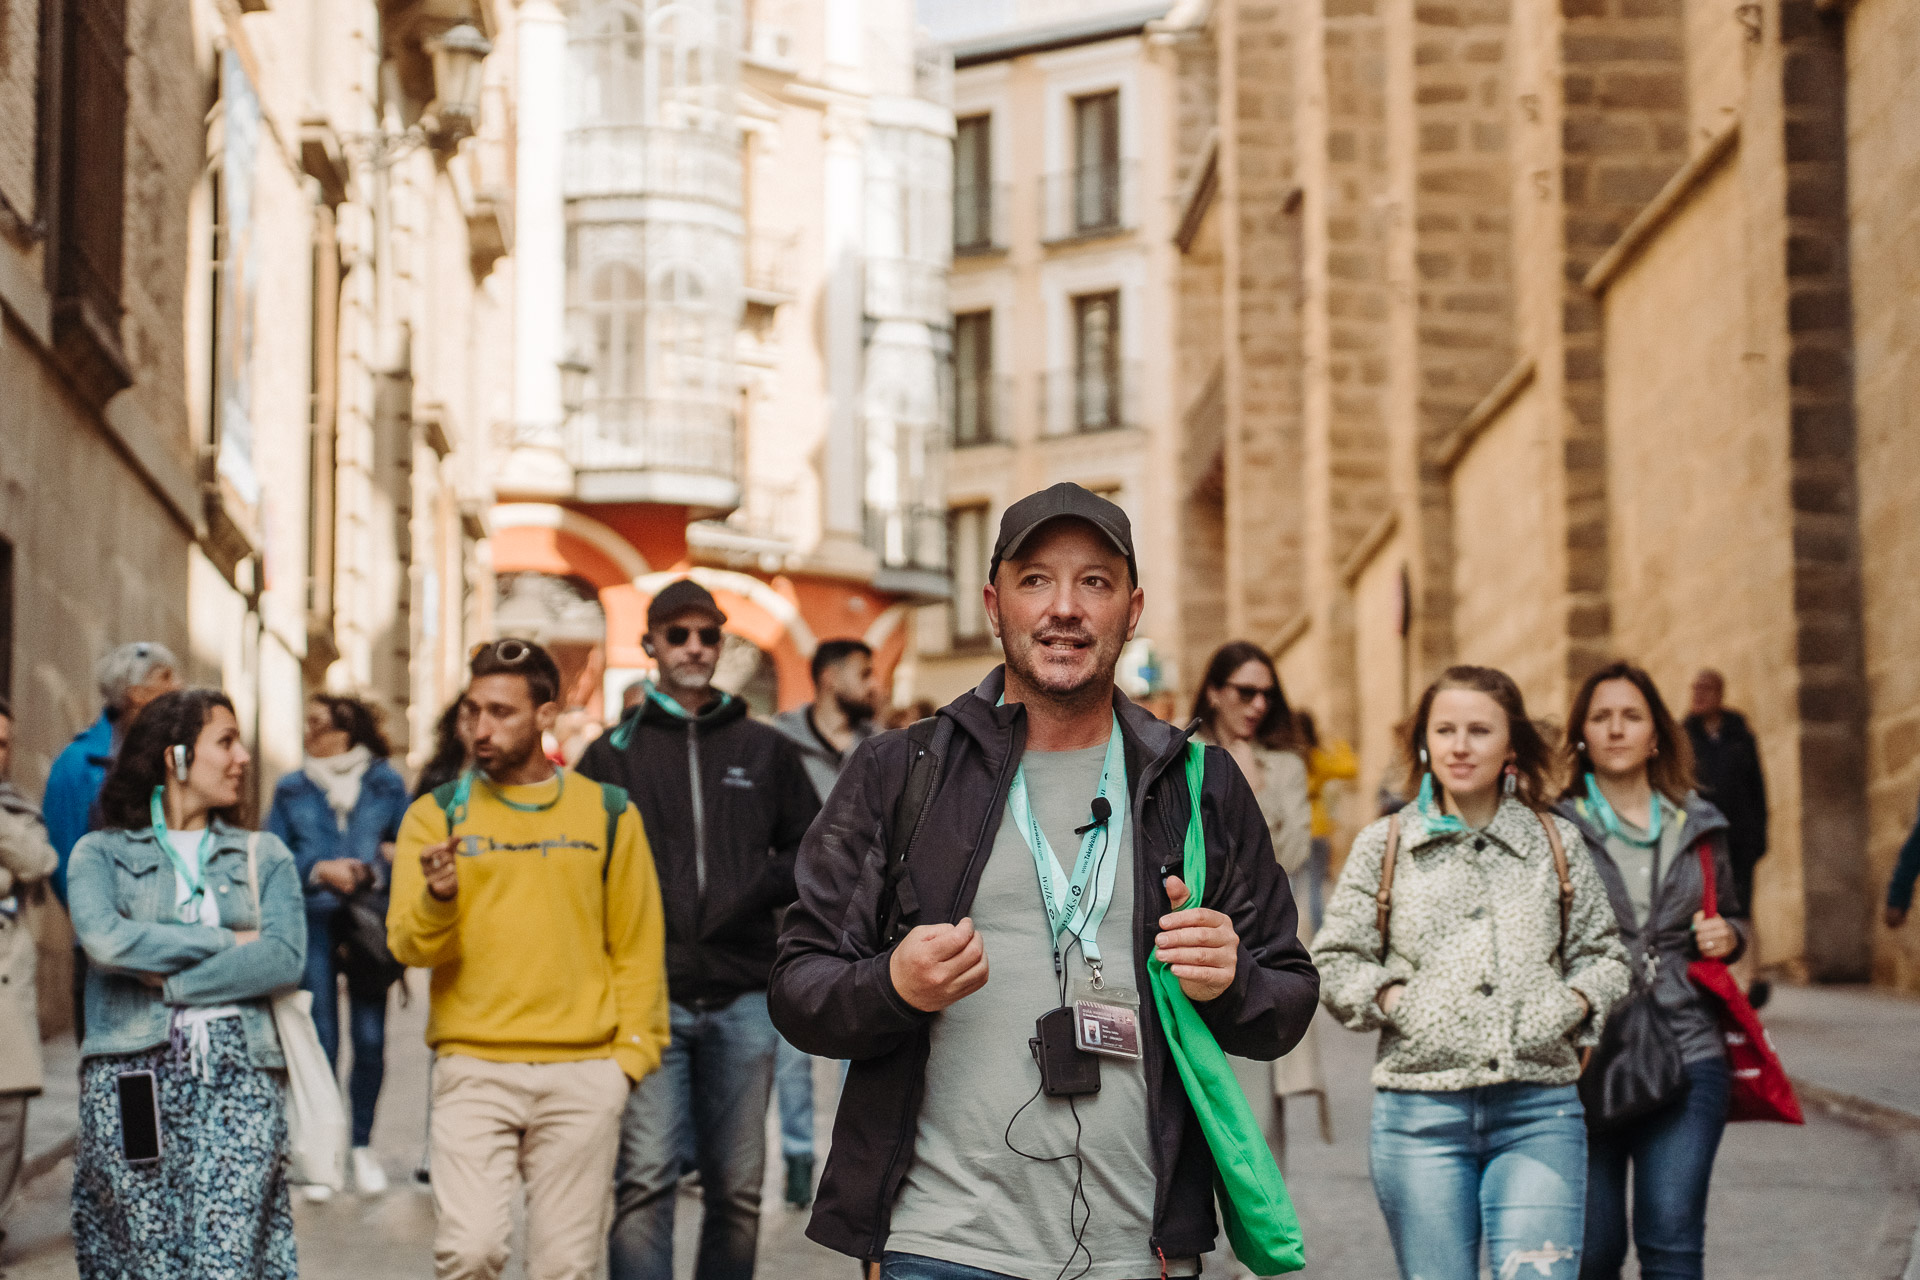 Walks tour guide with green tote bag leads a group of guests through the streets of a historic city